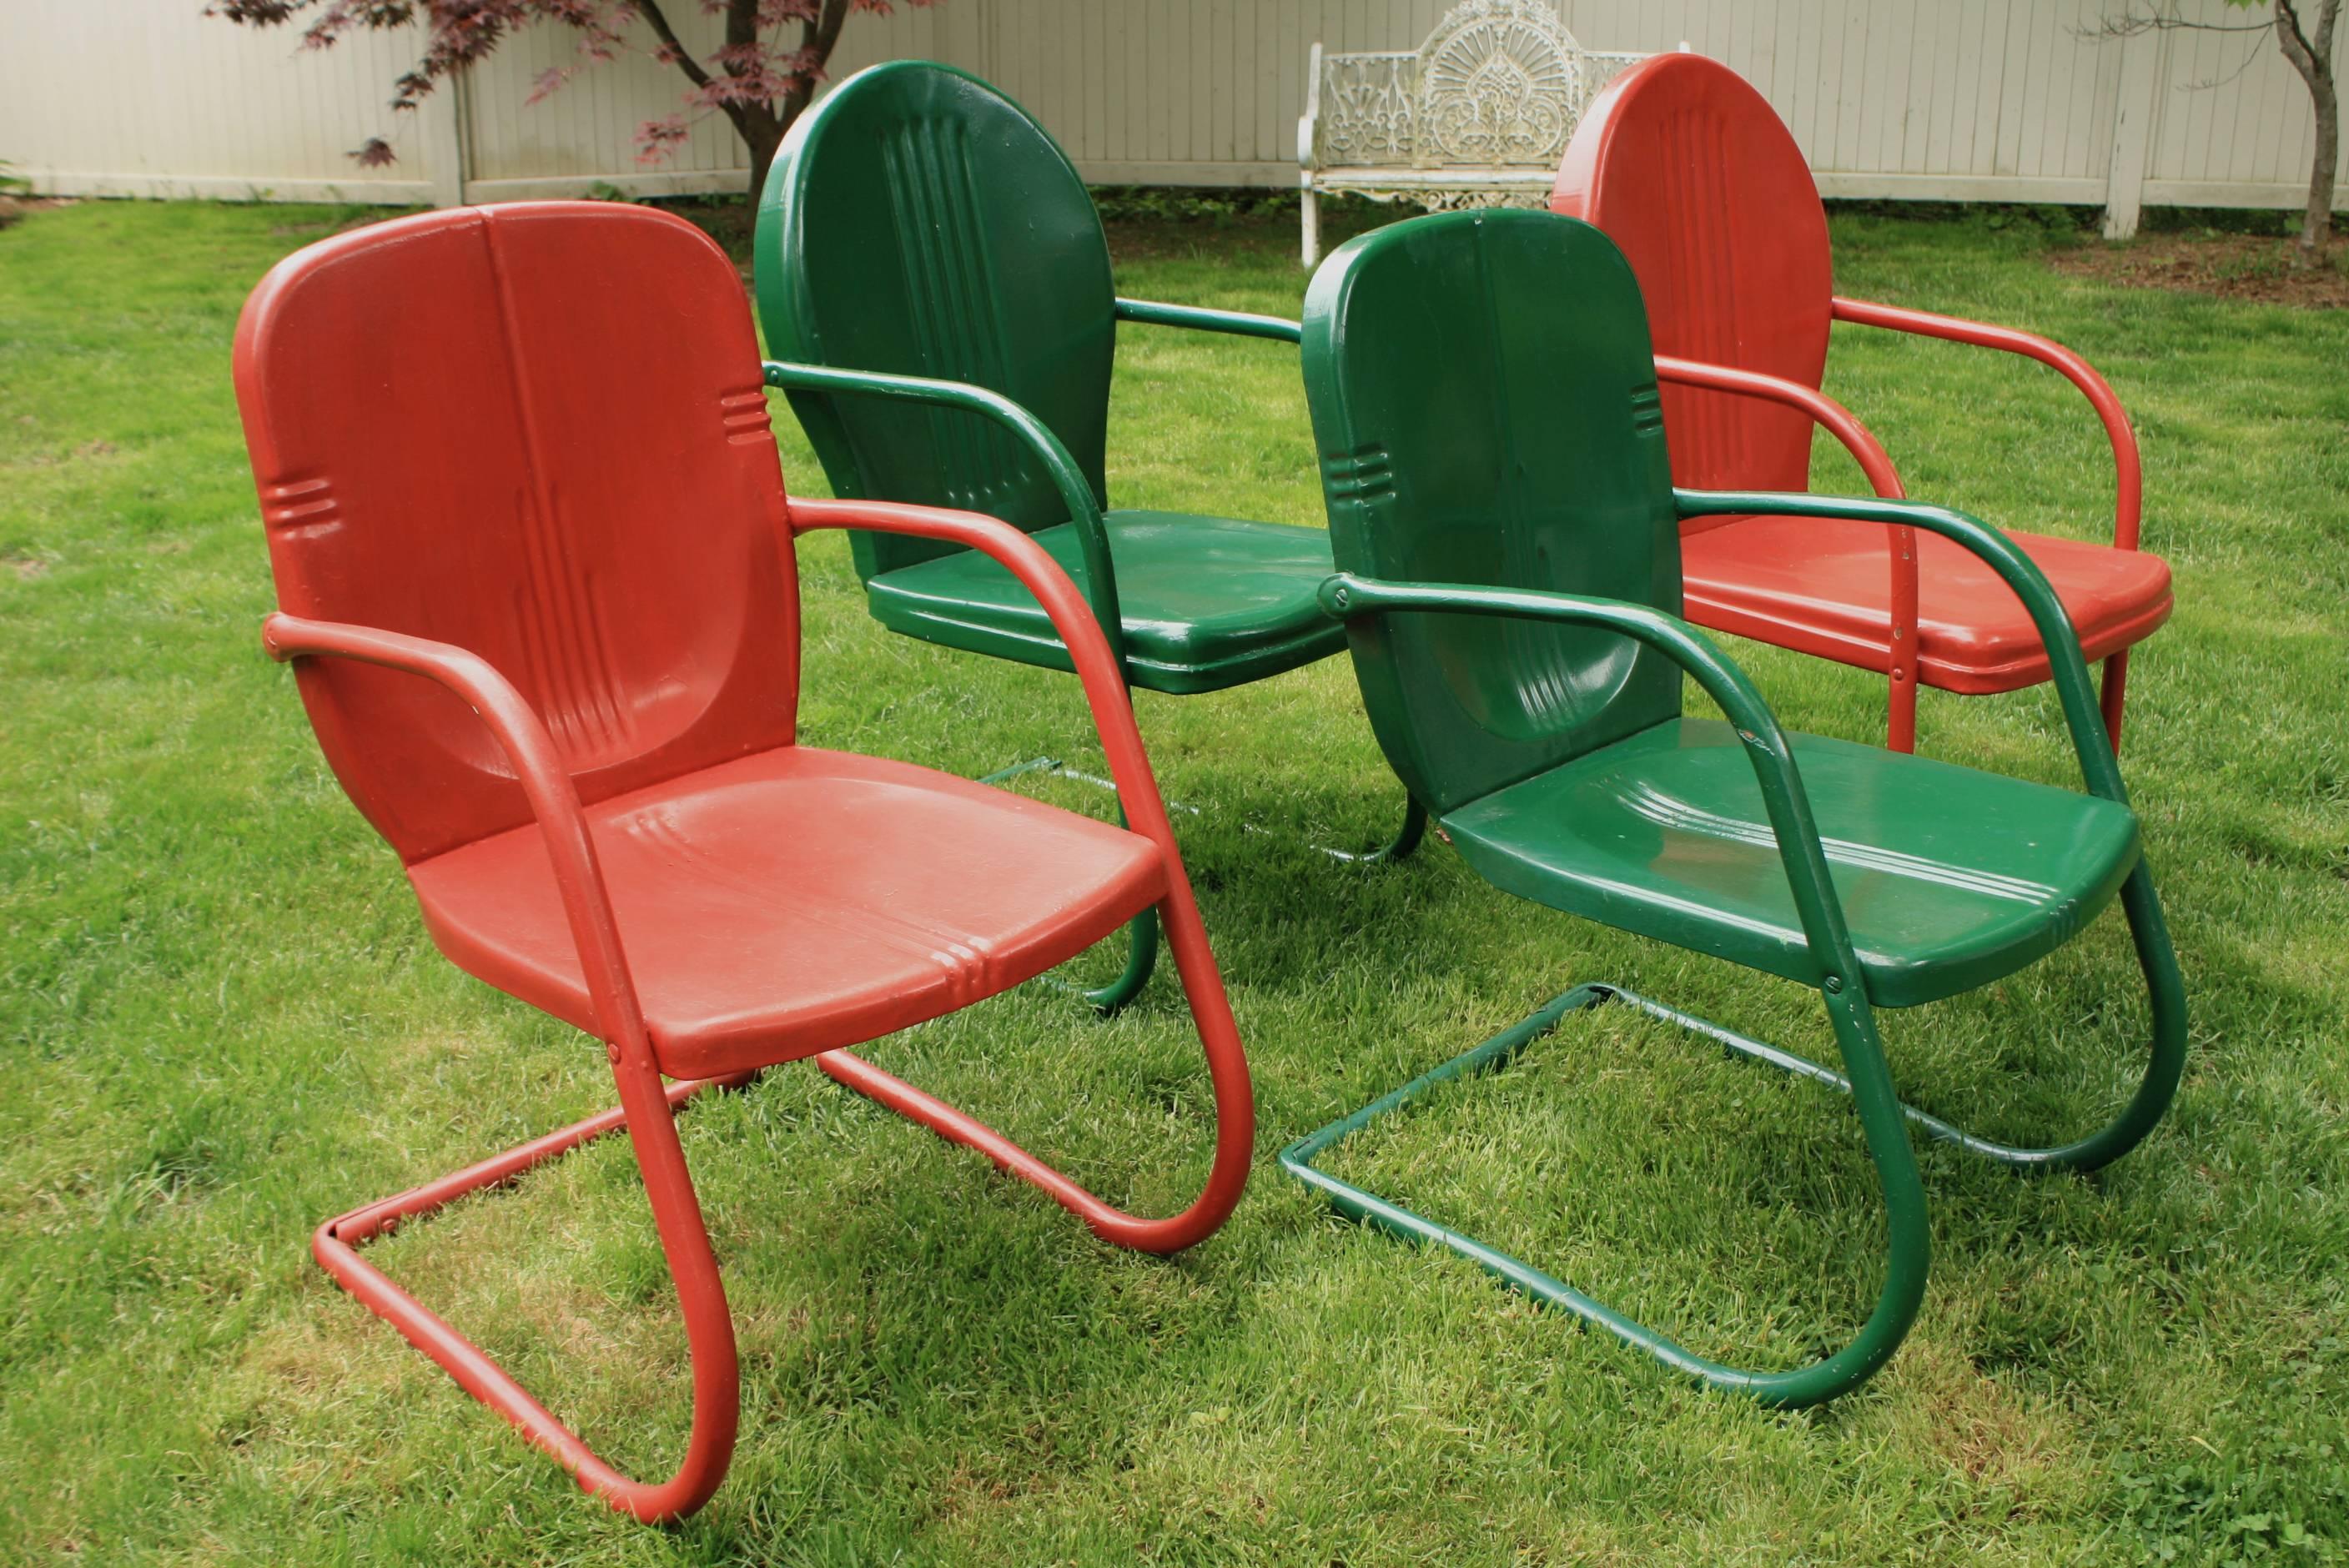 A set of four painted metal garden or patio armchairs, consisting of two pairs: one pair taller with rounded or "lollipop" backs, and the other pair shorter with flatter more deco-styled backs). Tubular arms and legs create a comfortable